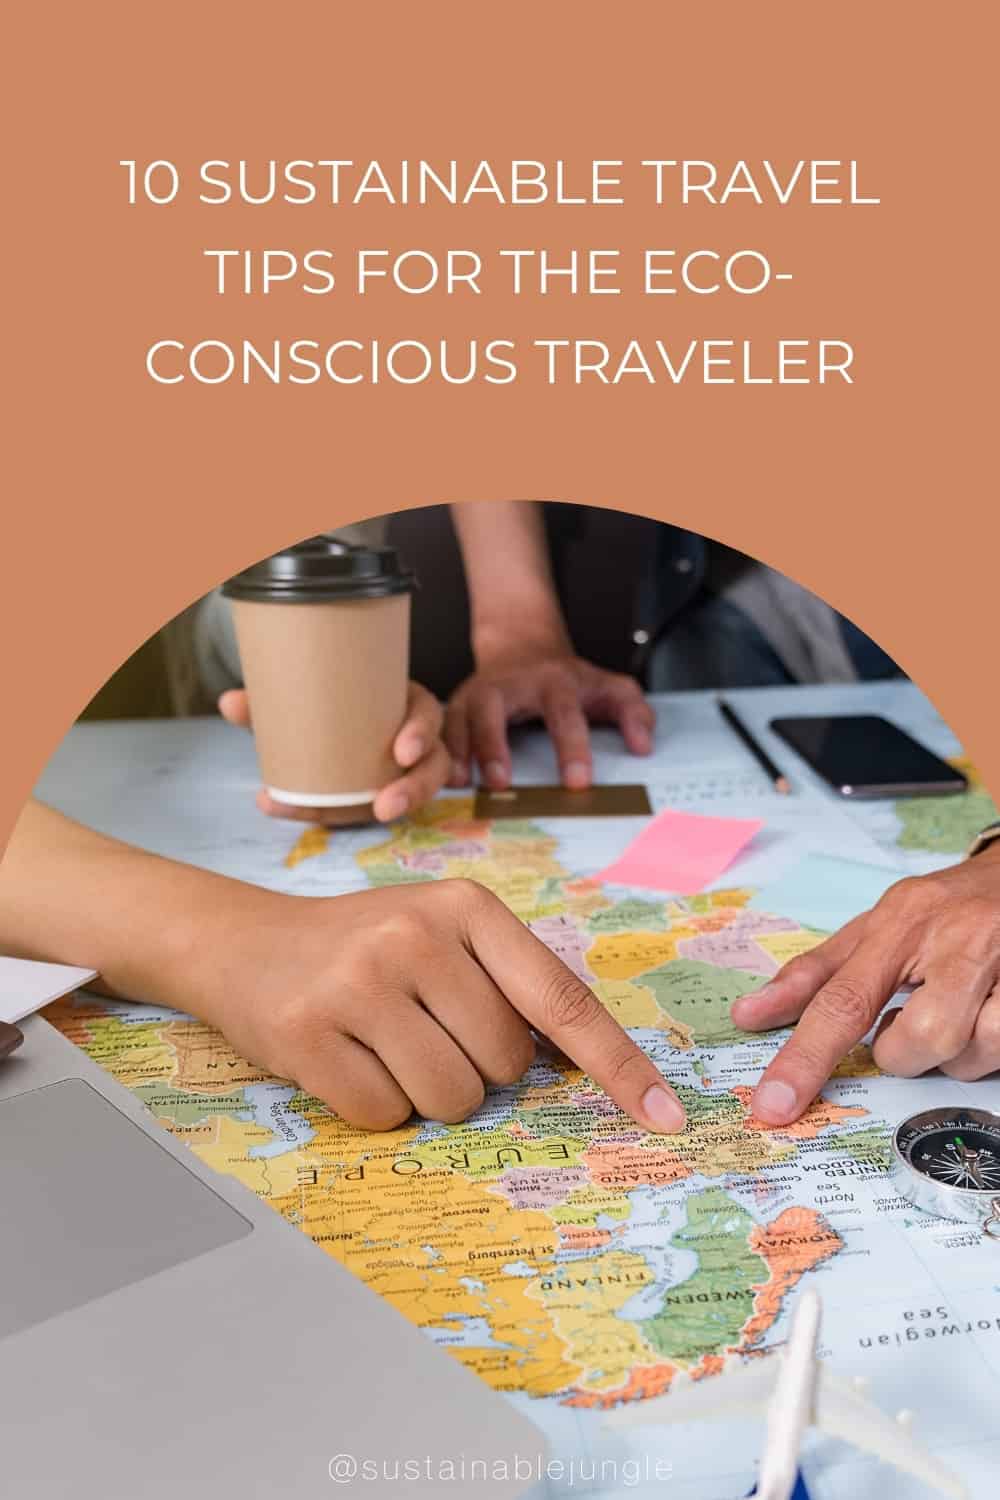 10 Sustainable Travel Tips For The Eco-Conscious Traveler #sustainabletravel #ecofriendlytravel #environmentallyfriendlytravel #sustainabletraveltips #sustainablejungle Image by raybon009 via Getty Images on Canva Pro